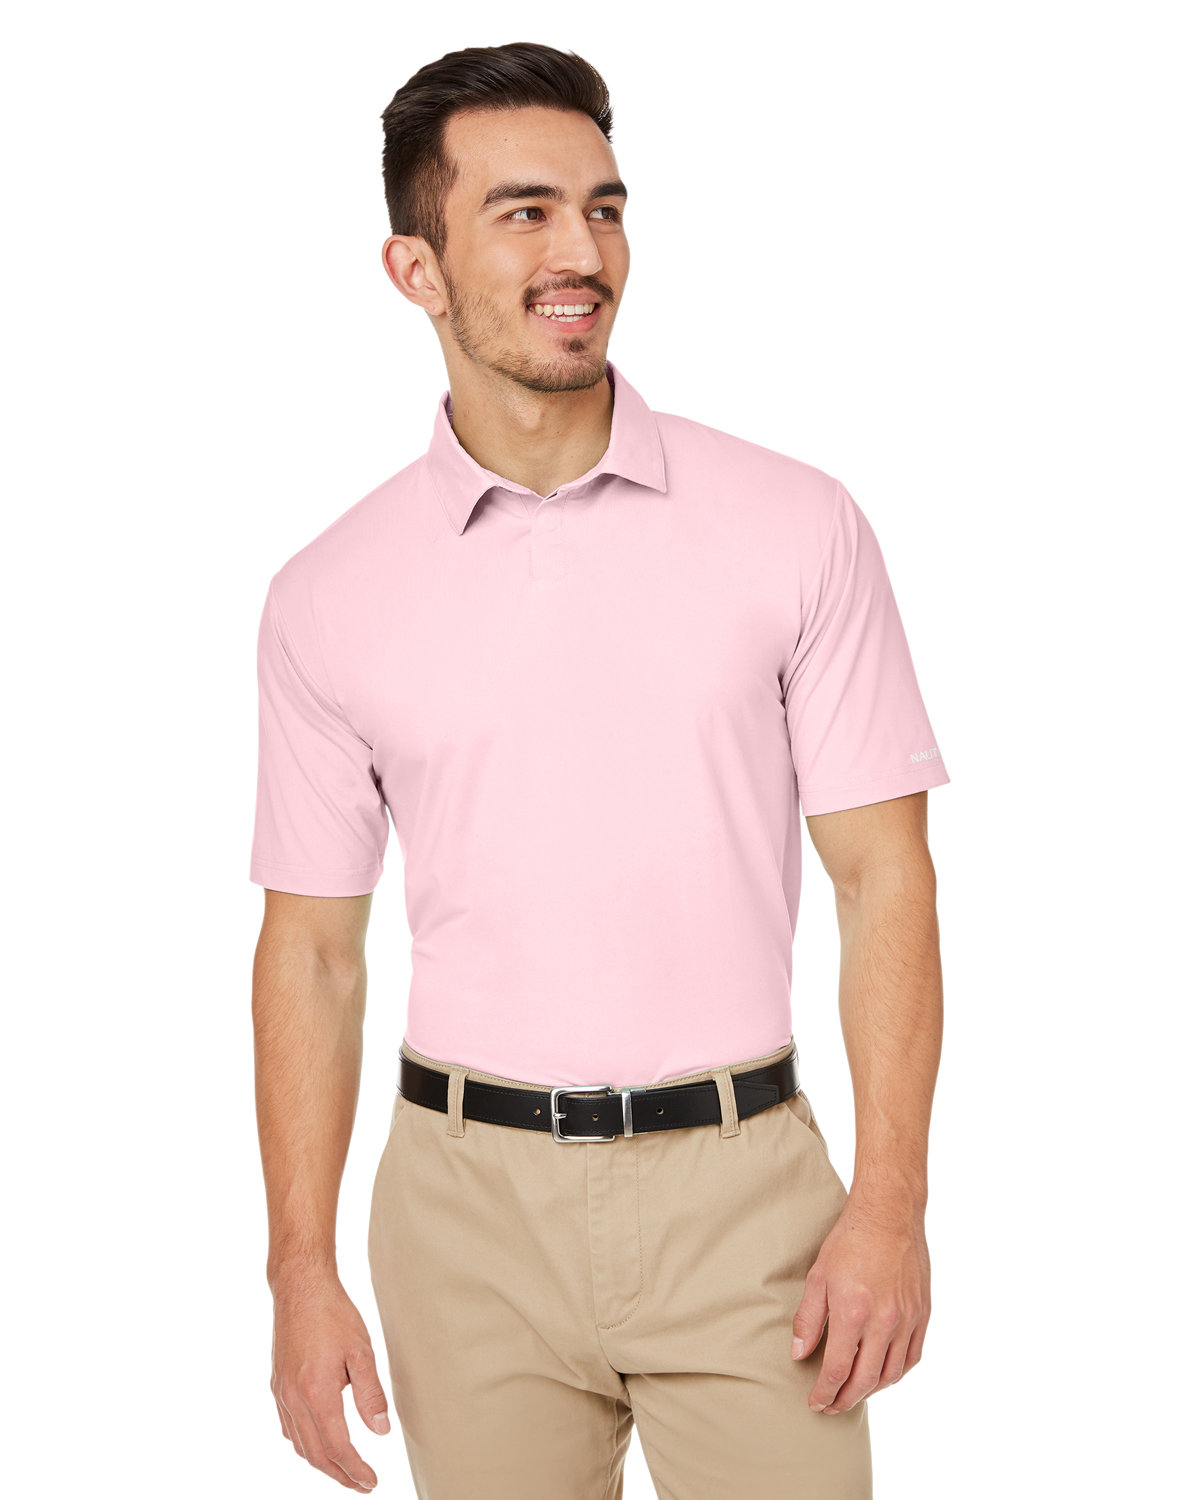 Nautica Men's Saltwater Stretch Polo sunset pink 